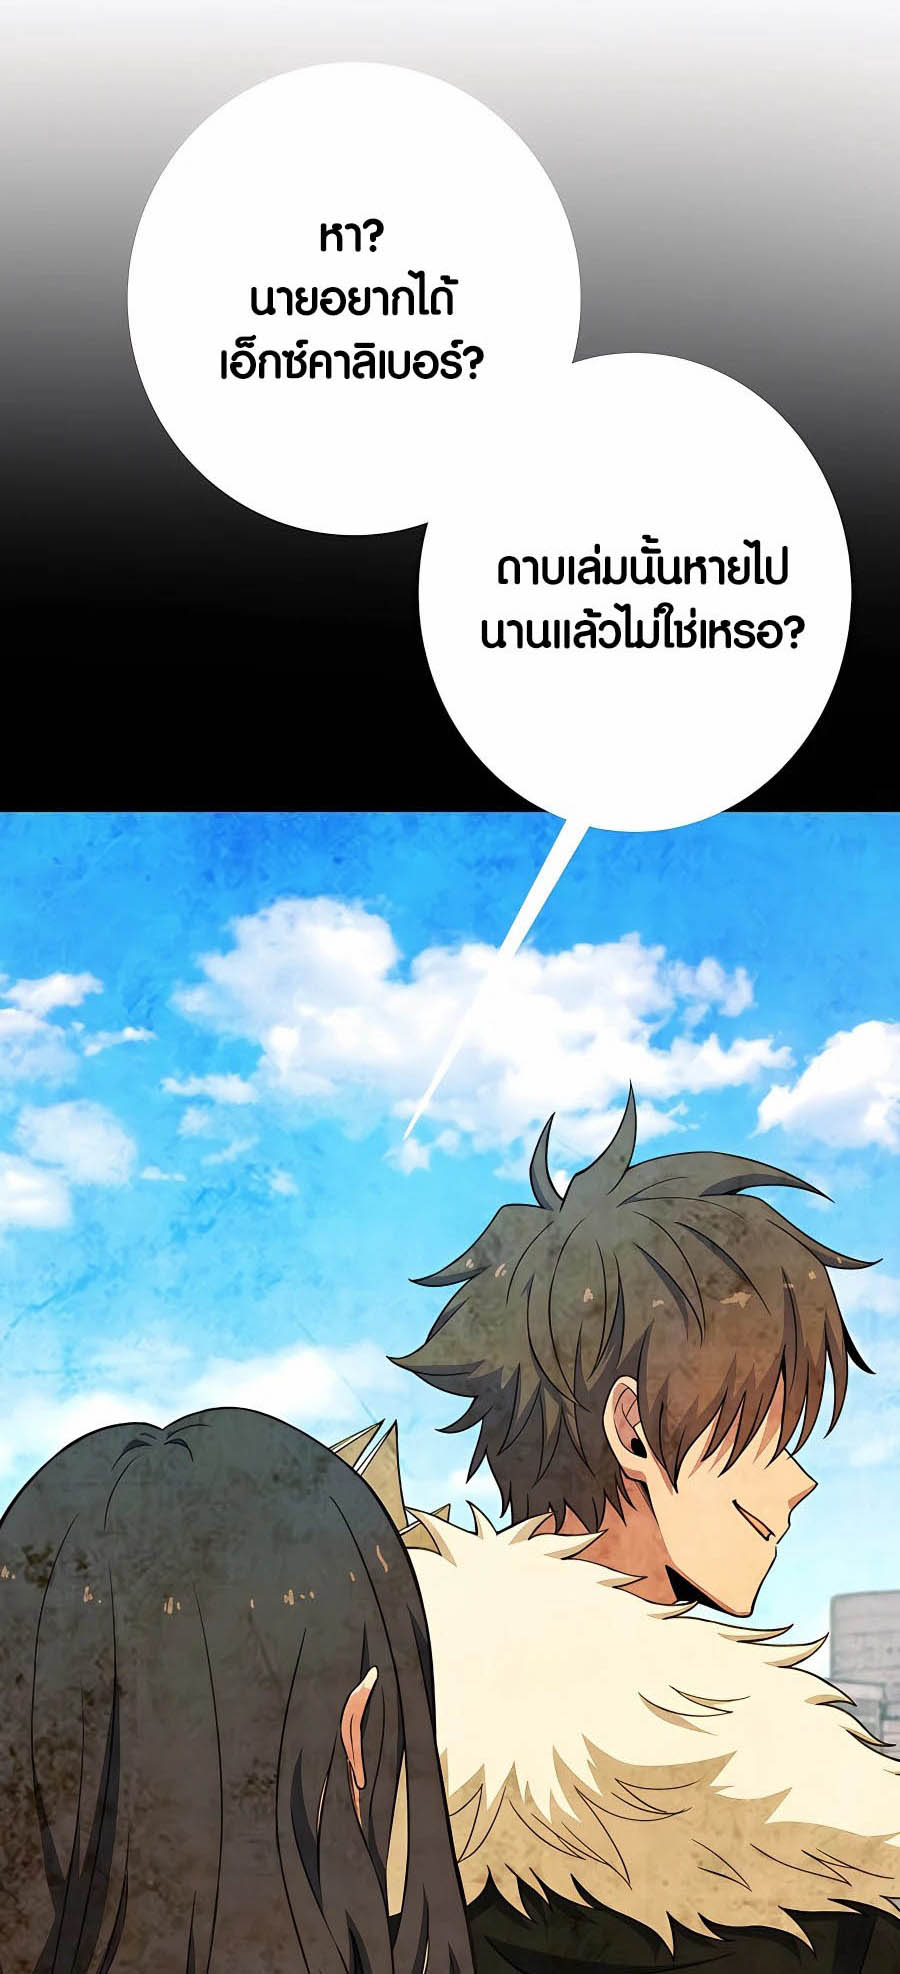 à¸­à¹ˆà¸²à¸™à¸¡à¸±à¸™à¸®à¸§à¸² à¹€à¸£à¸·à¹ˆà¸­à¸‡ The Part Time Land of the Gods 56 46